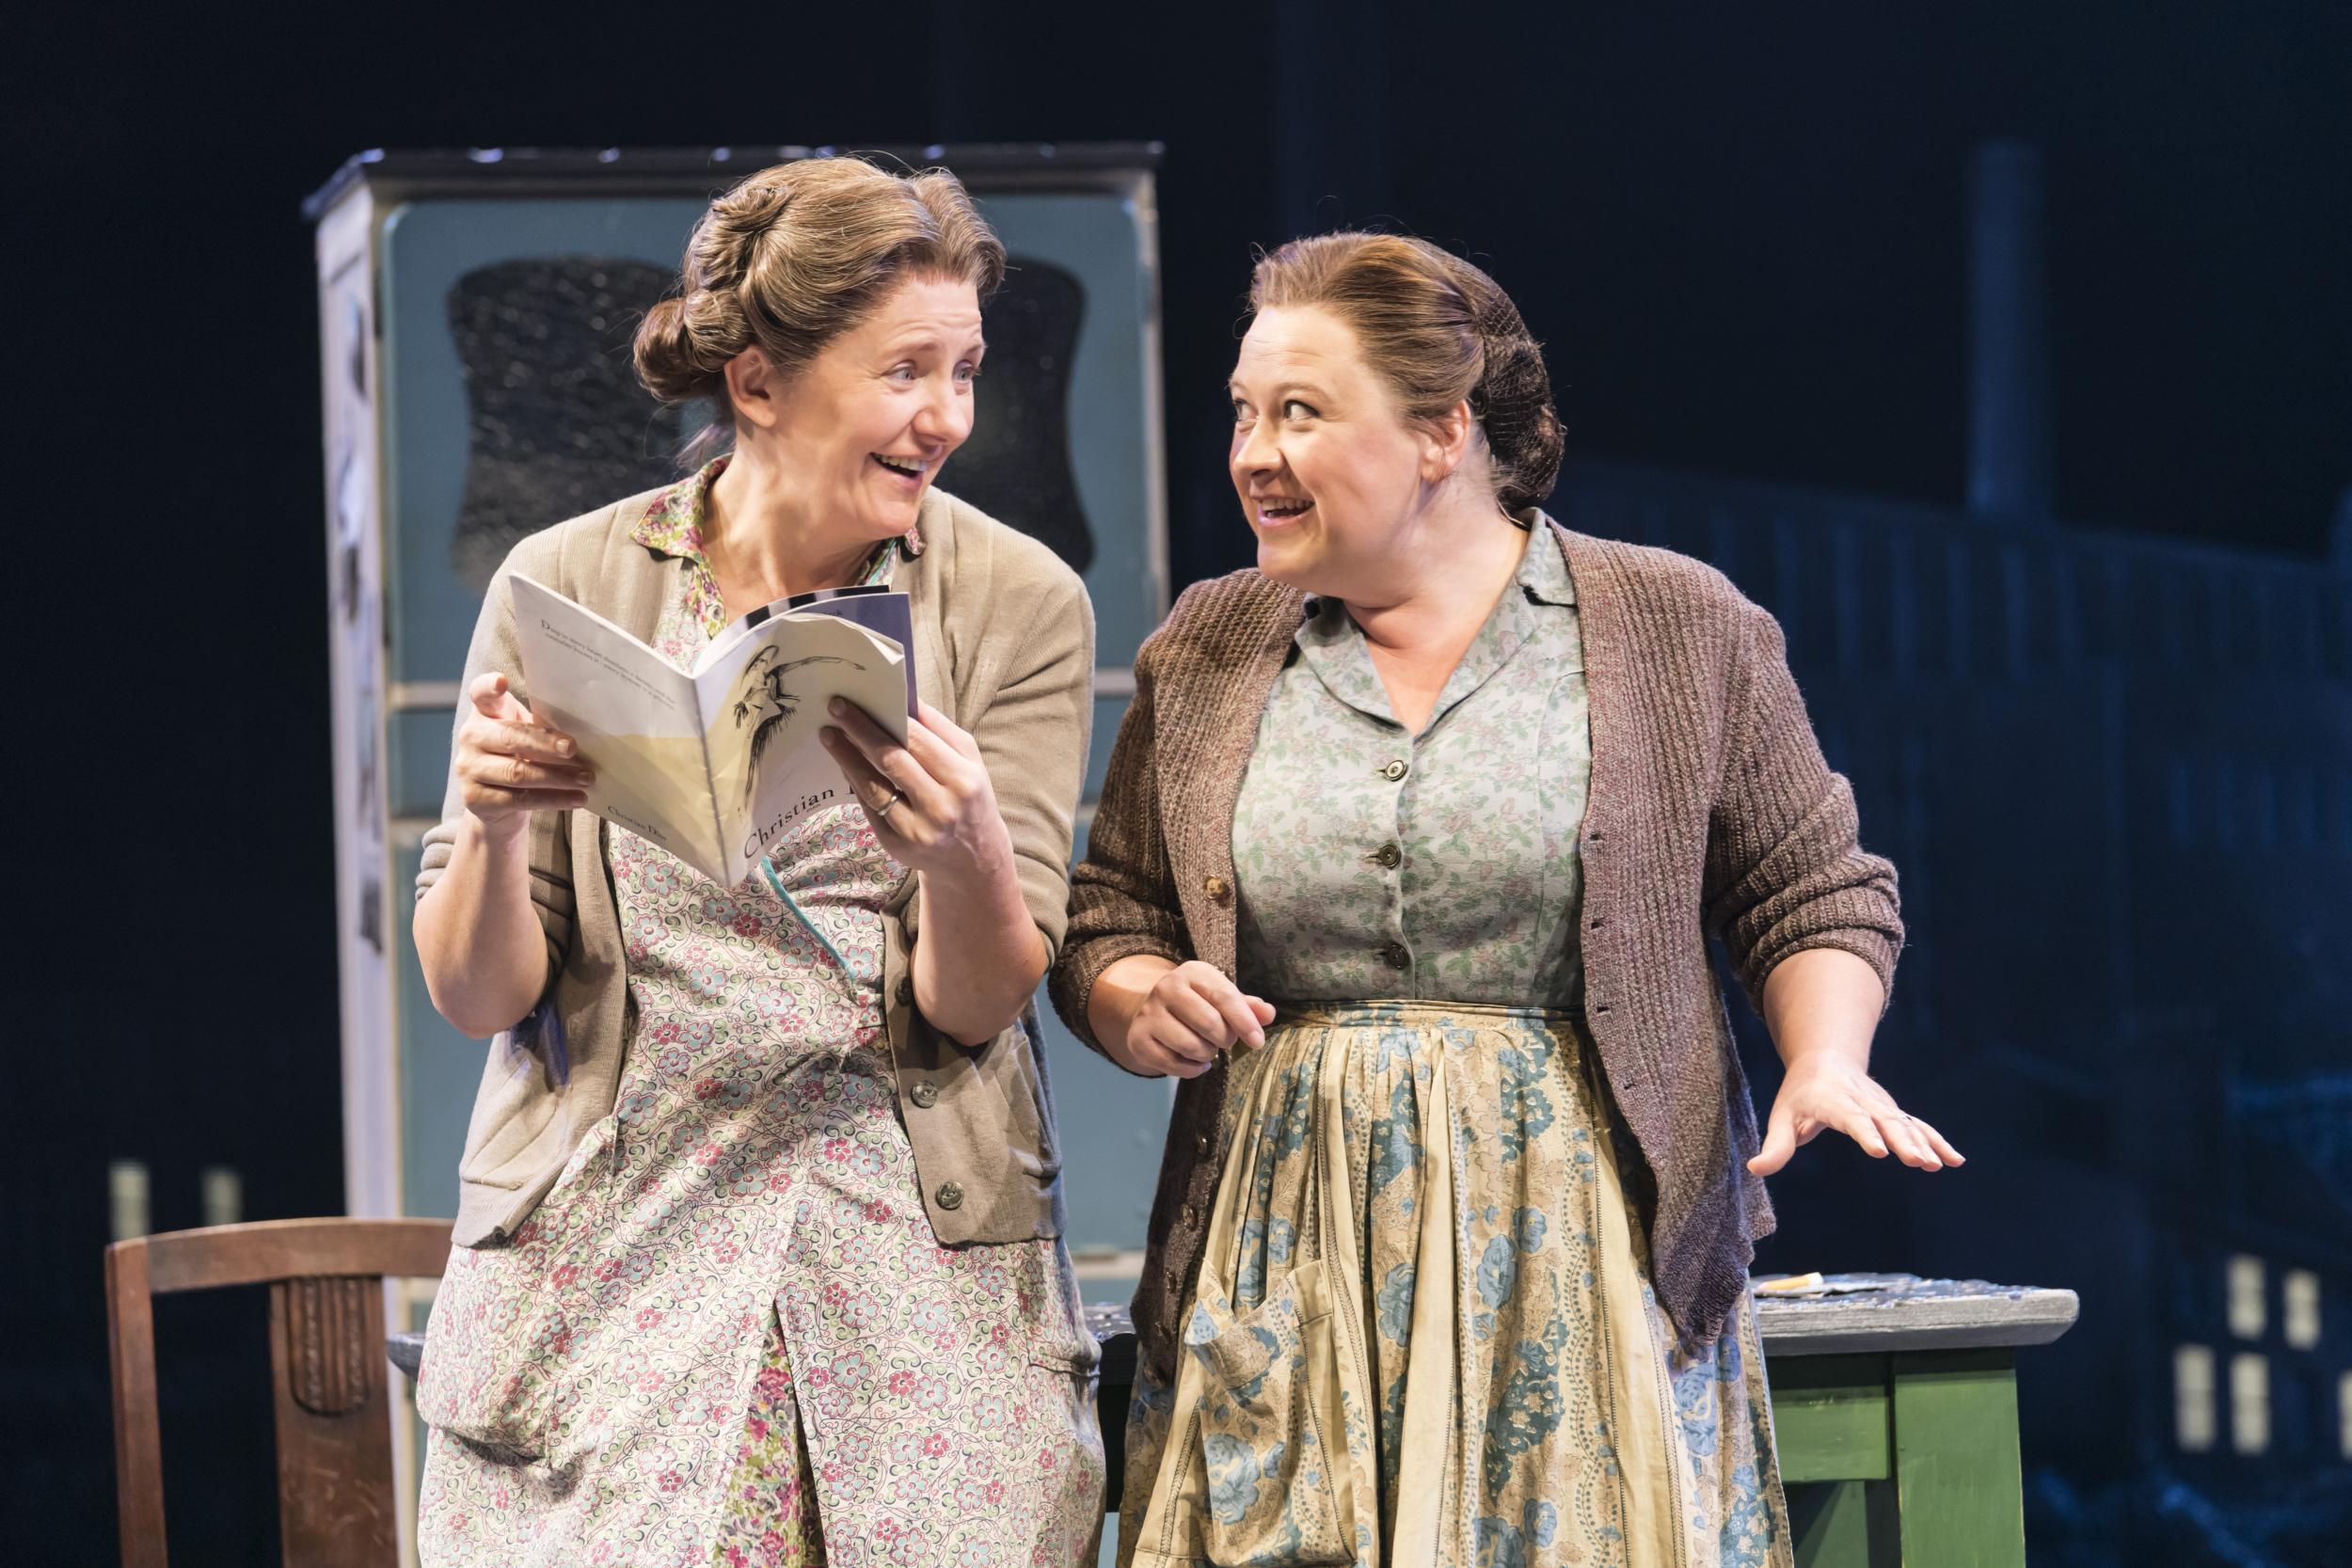 Ada Harris - played by Clare Burt, alongside Claire Machin as Violet, in Flowers for Mrs Harris - is 'gentler, wiser and more caring than most of the models we see around us'